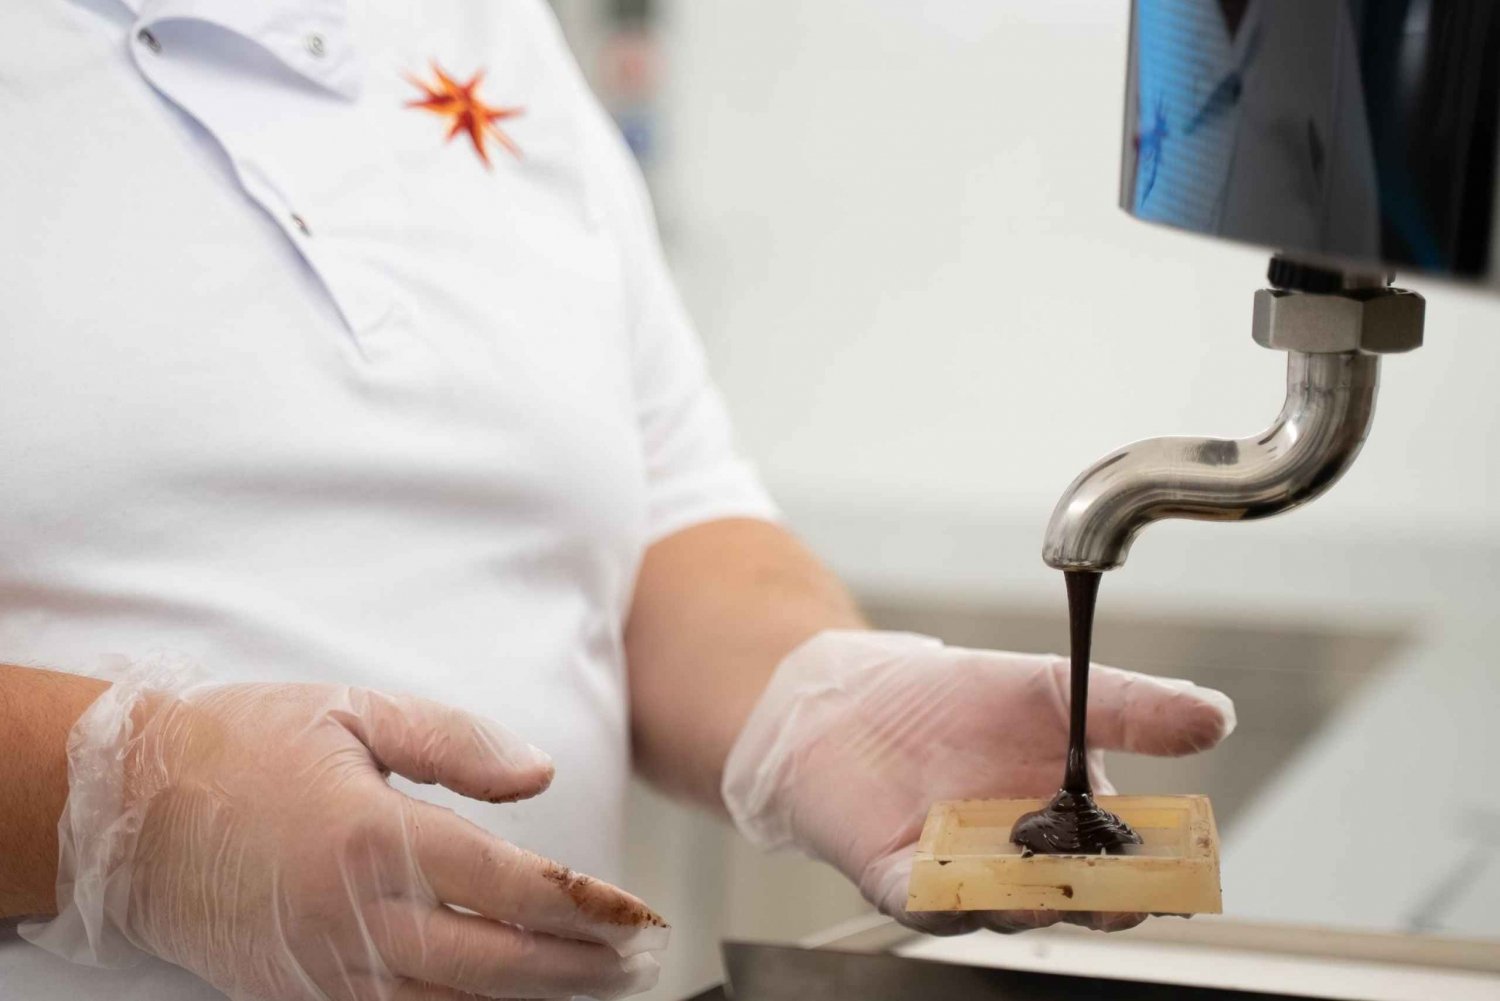 Become a chocolatier for a day!